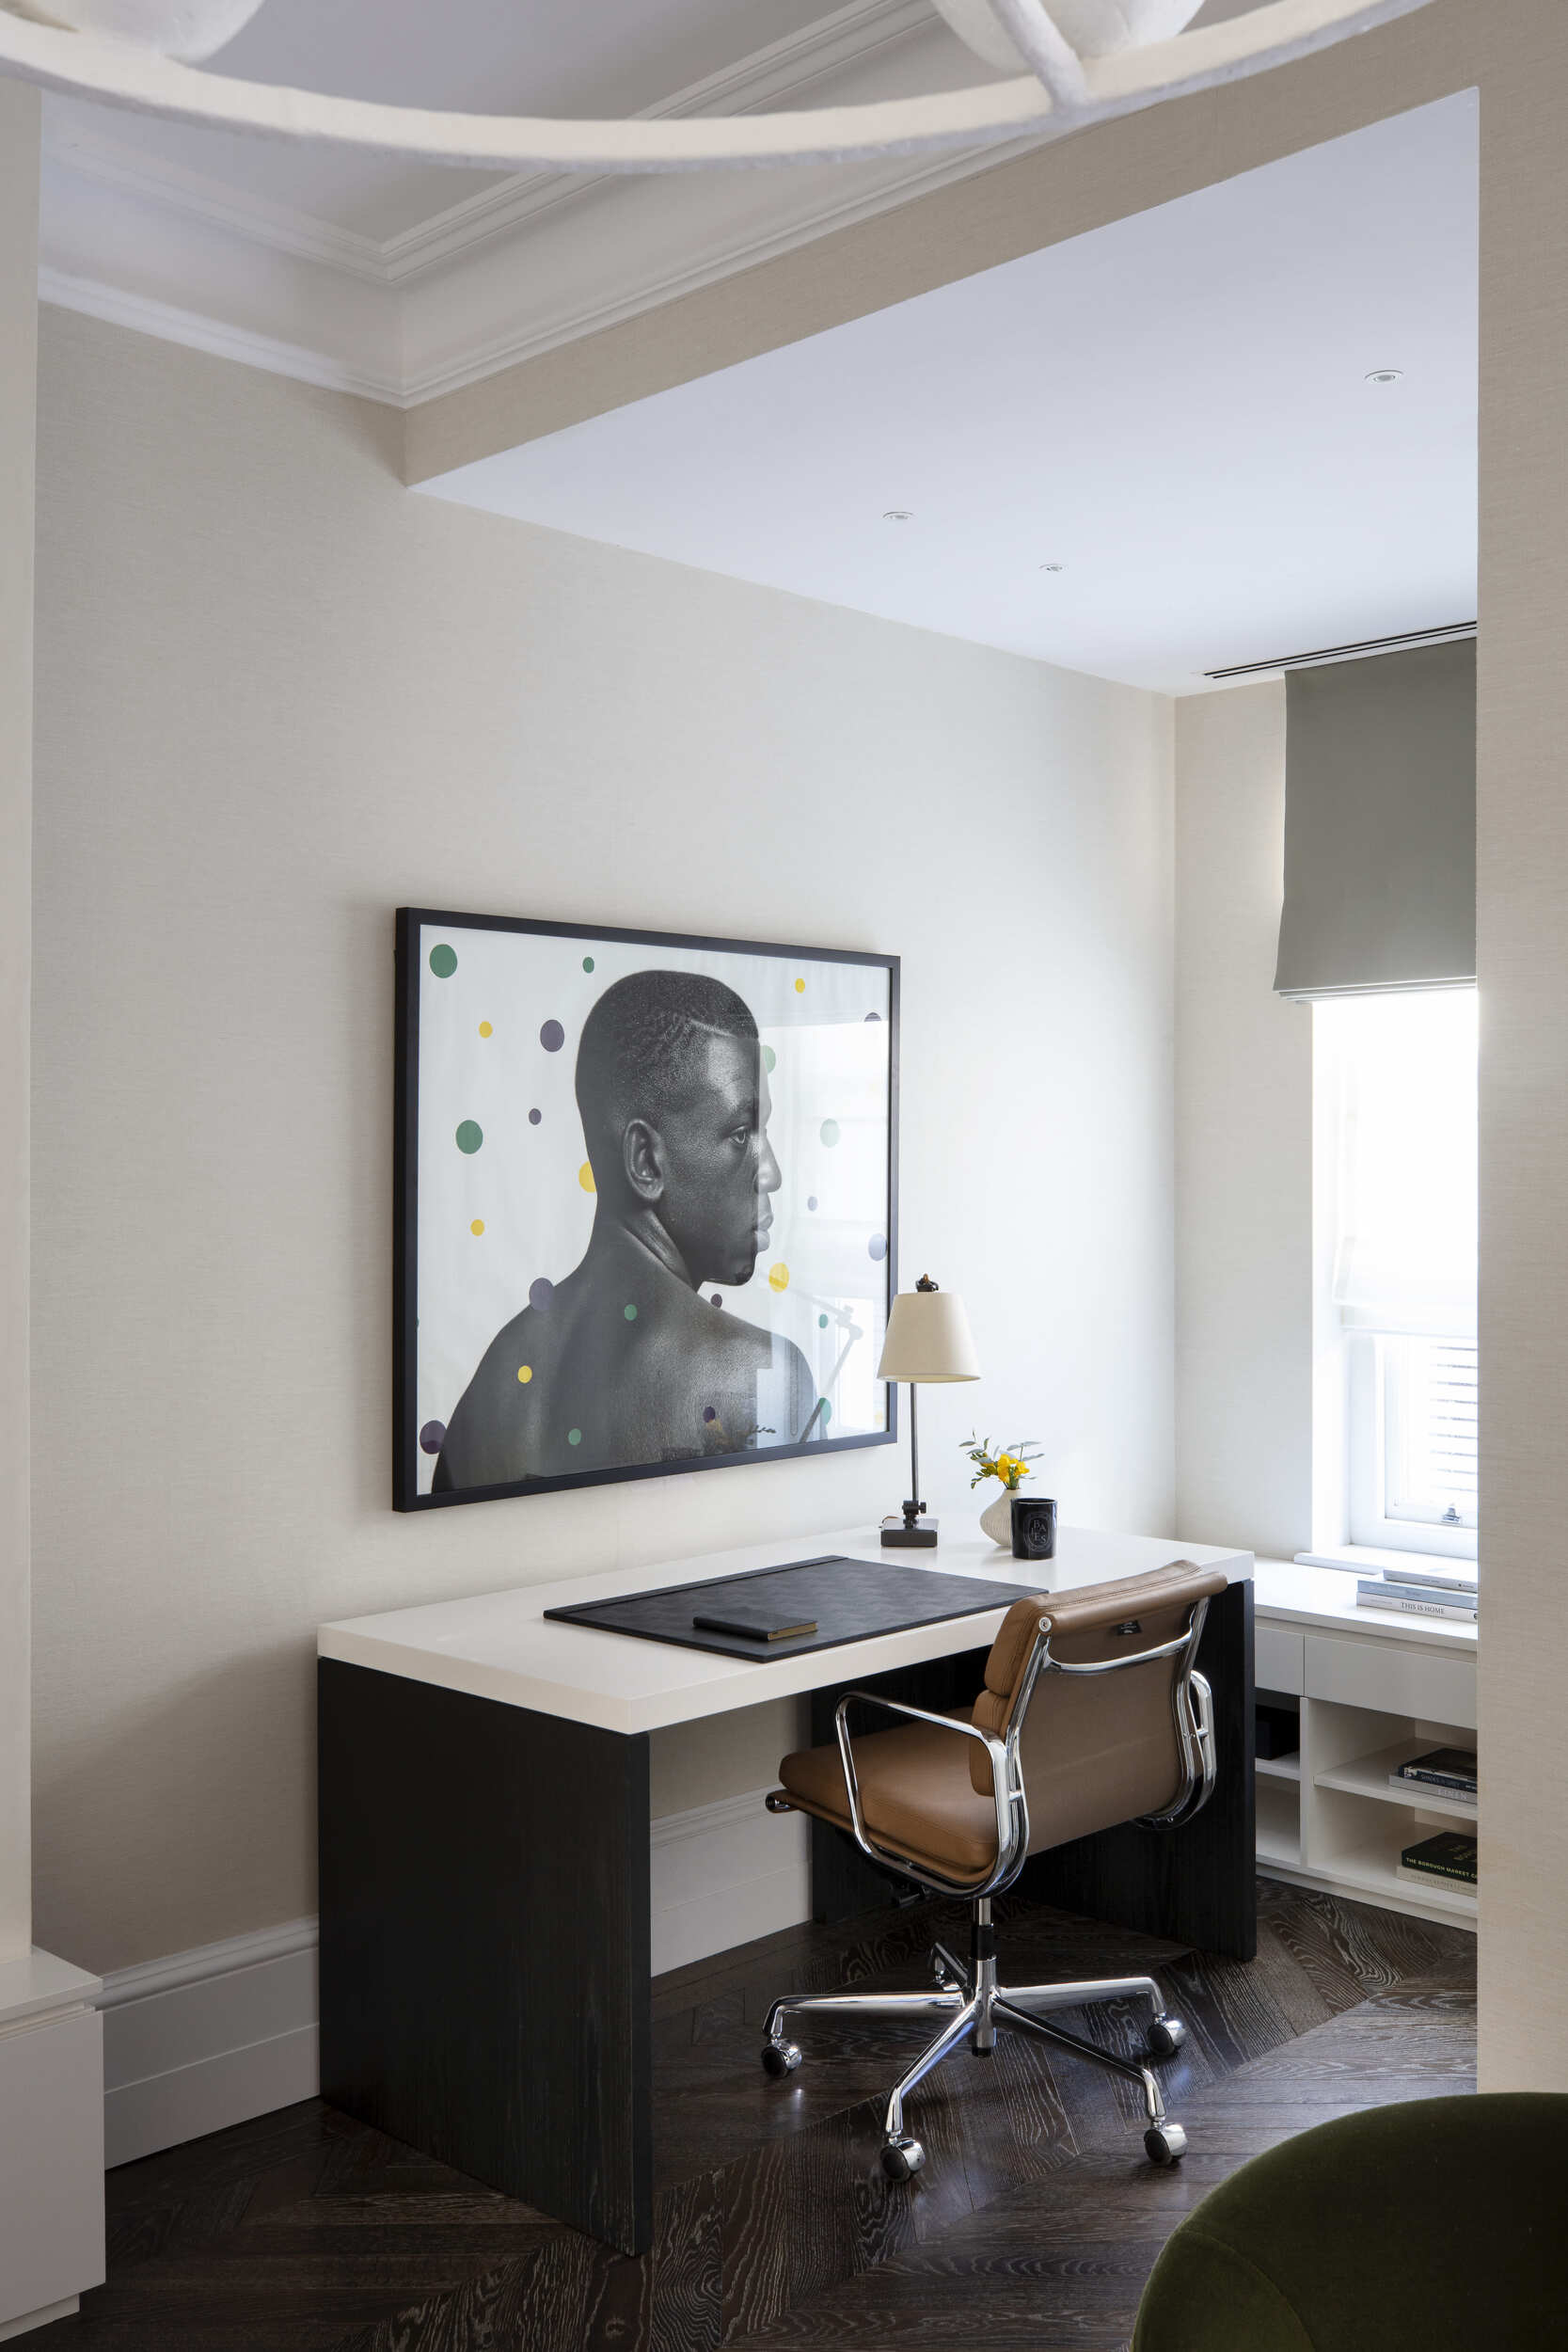 Study in perfection with wall mounted artwork